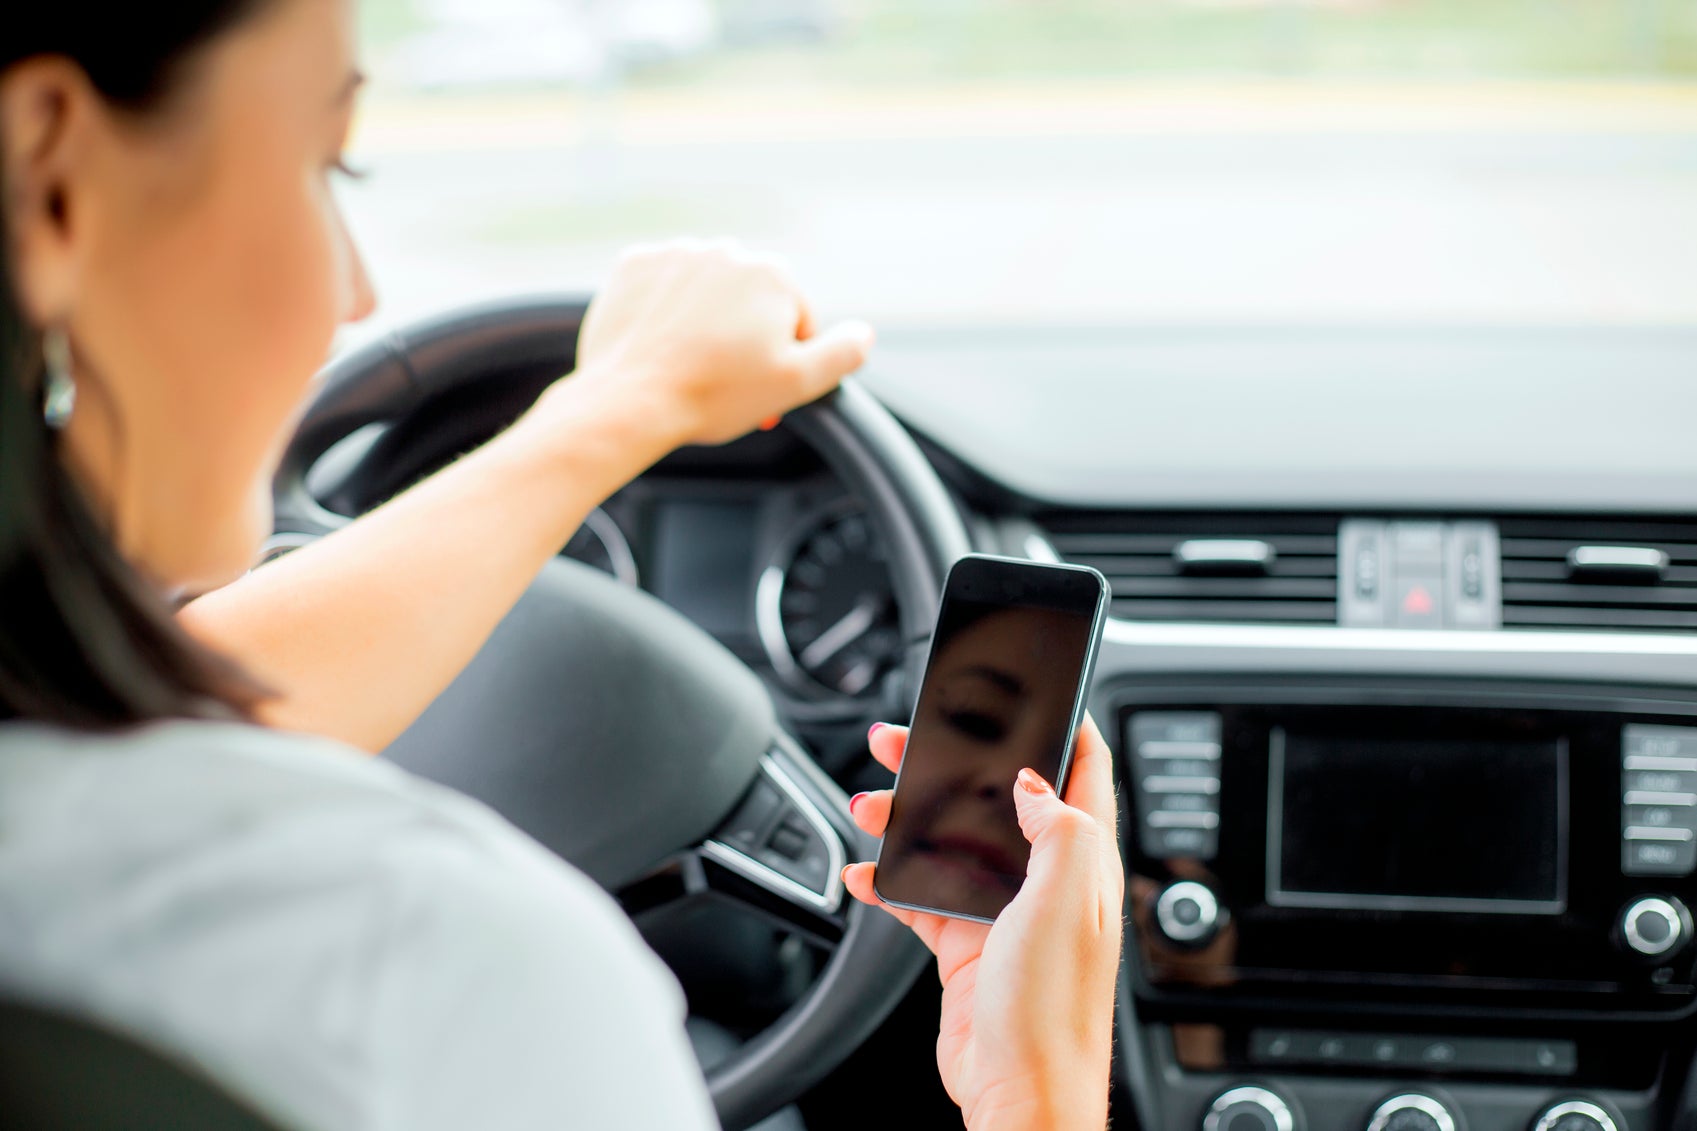 Women are less likely to be distracted while driving, research has suggested